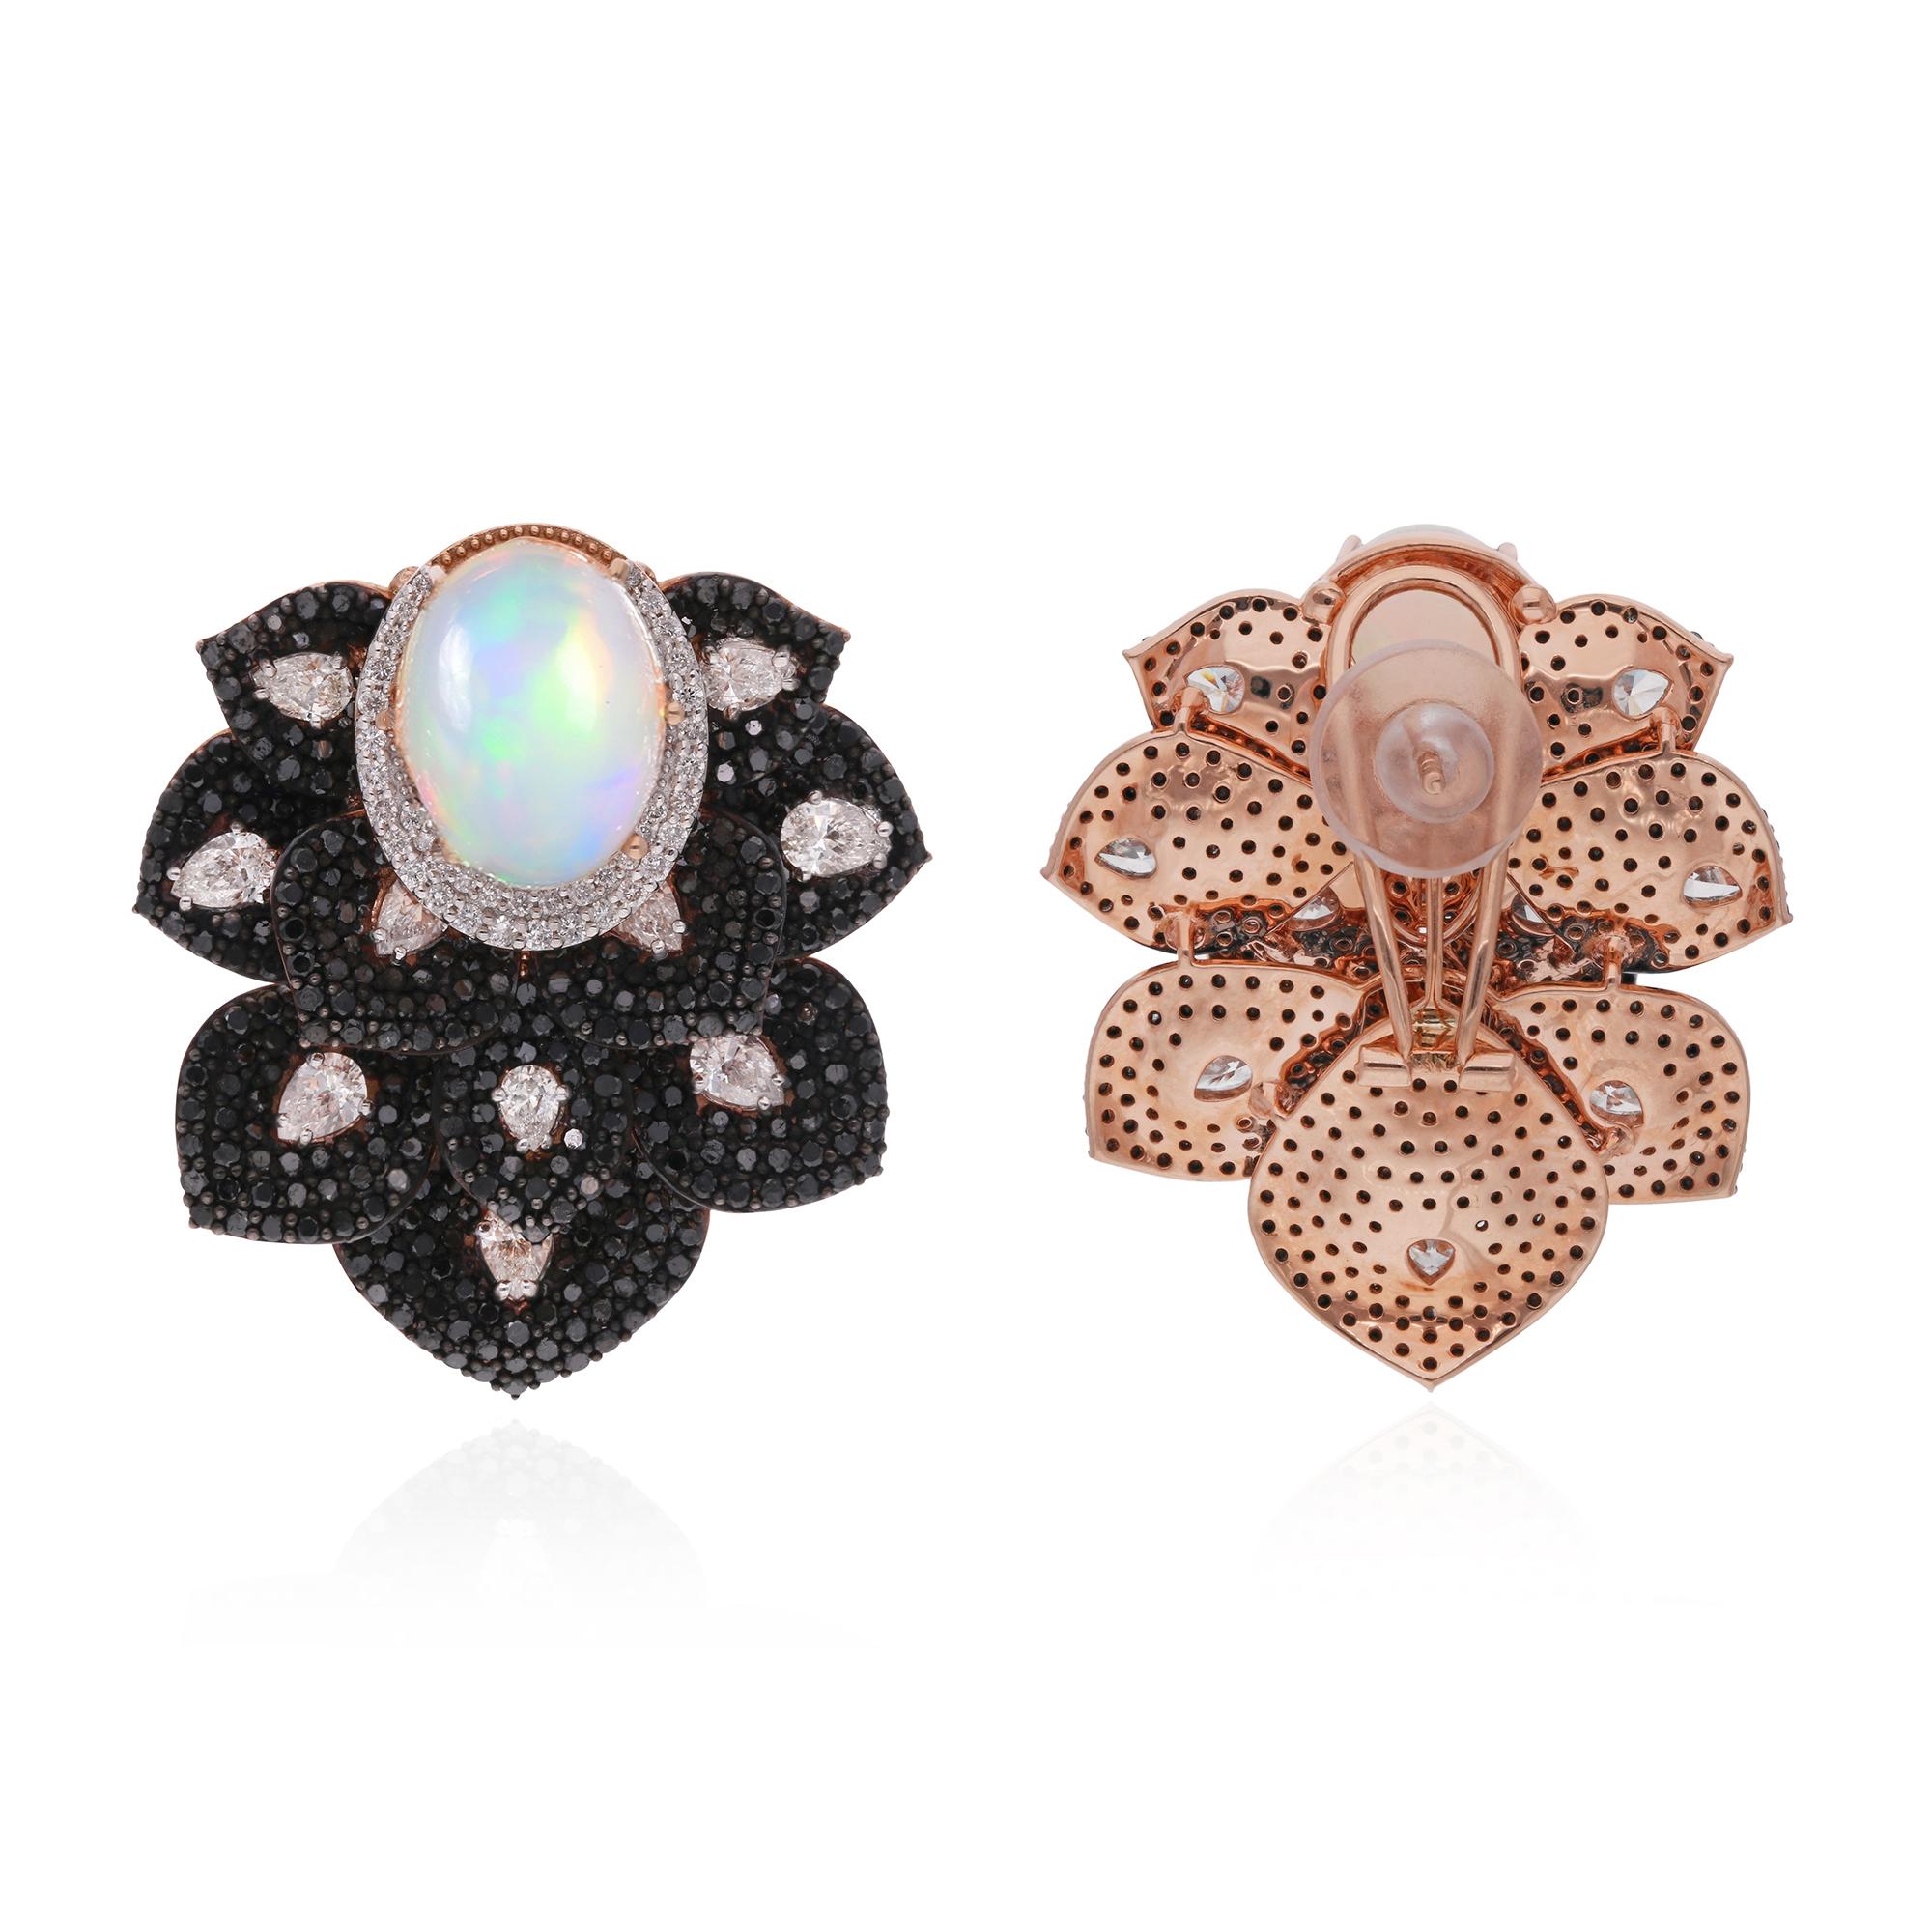 Elevate your jewelry collection with these striking white and black diamond stud earrings, adorned with opal gemstones and set in luxurious 14 karat rose gold. Each element of these earrings exudes elegance and sophistication, making them a standout